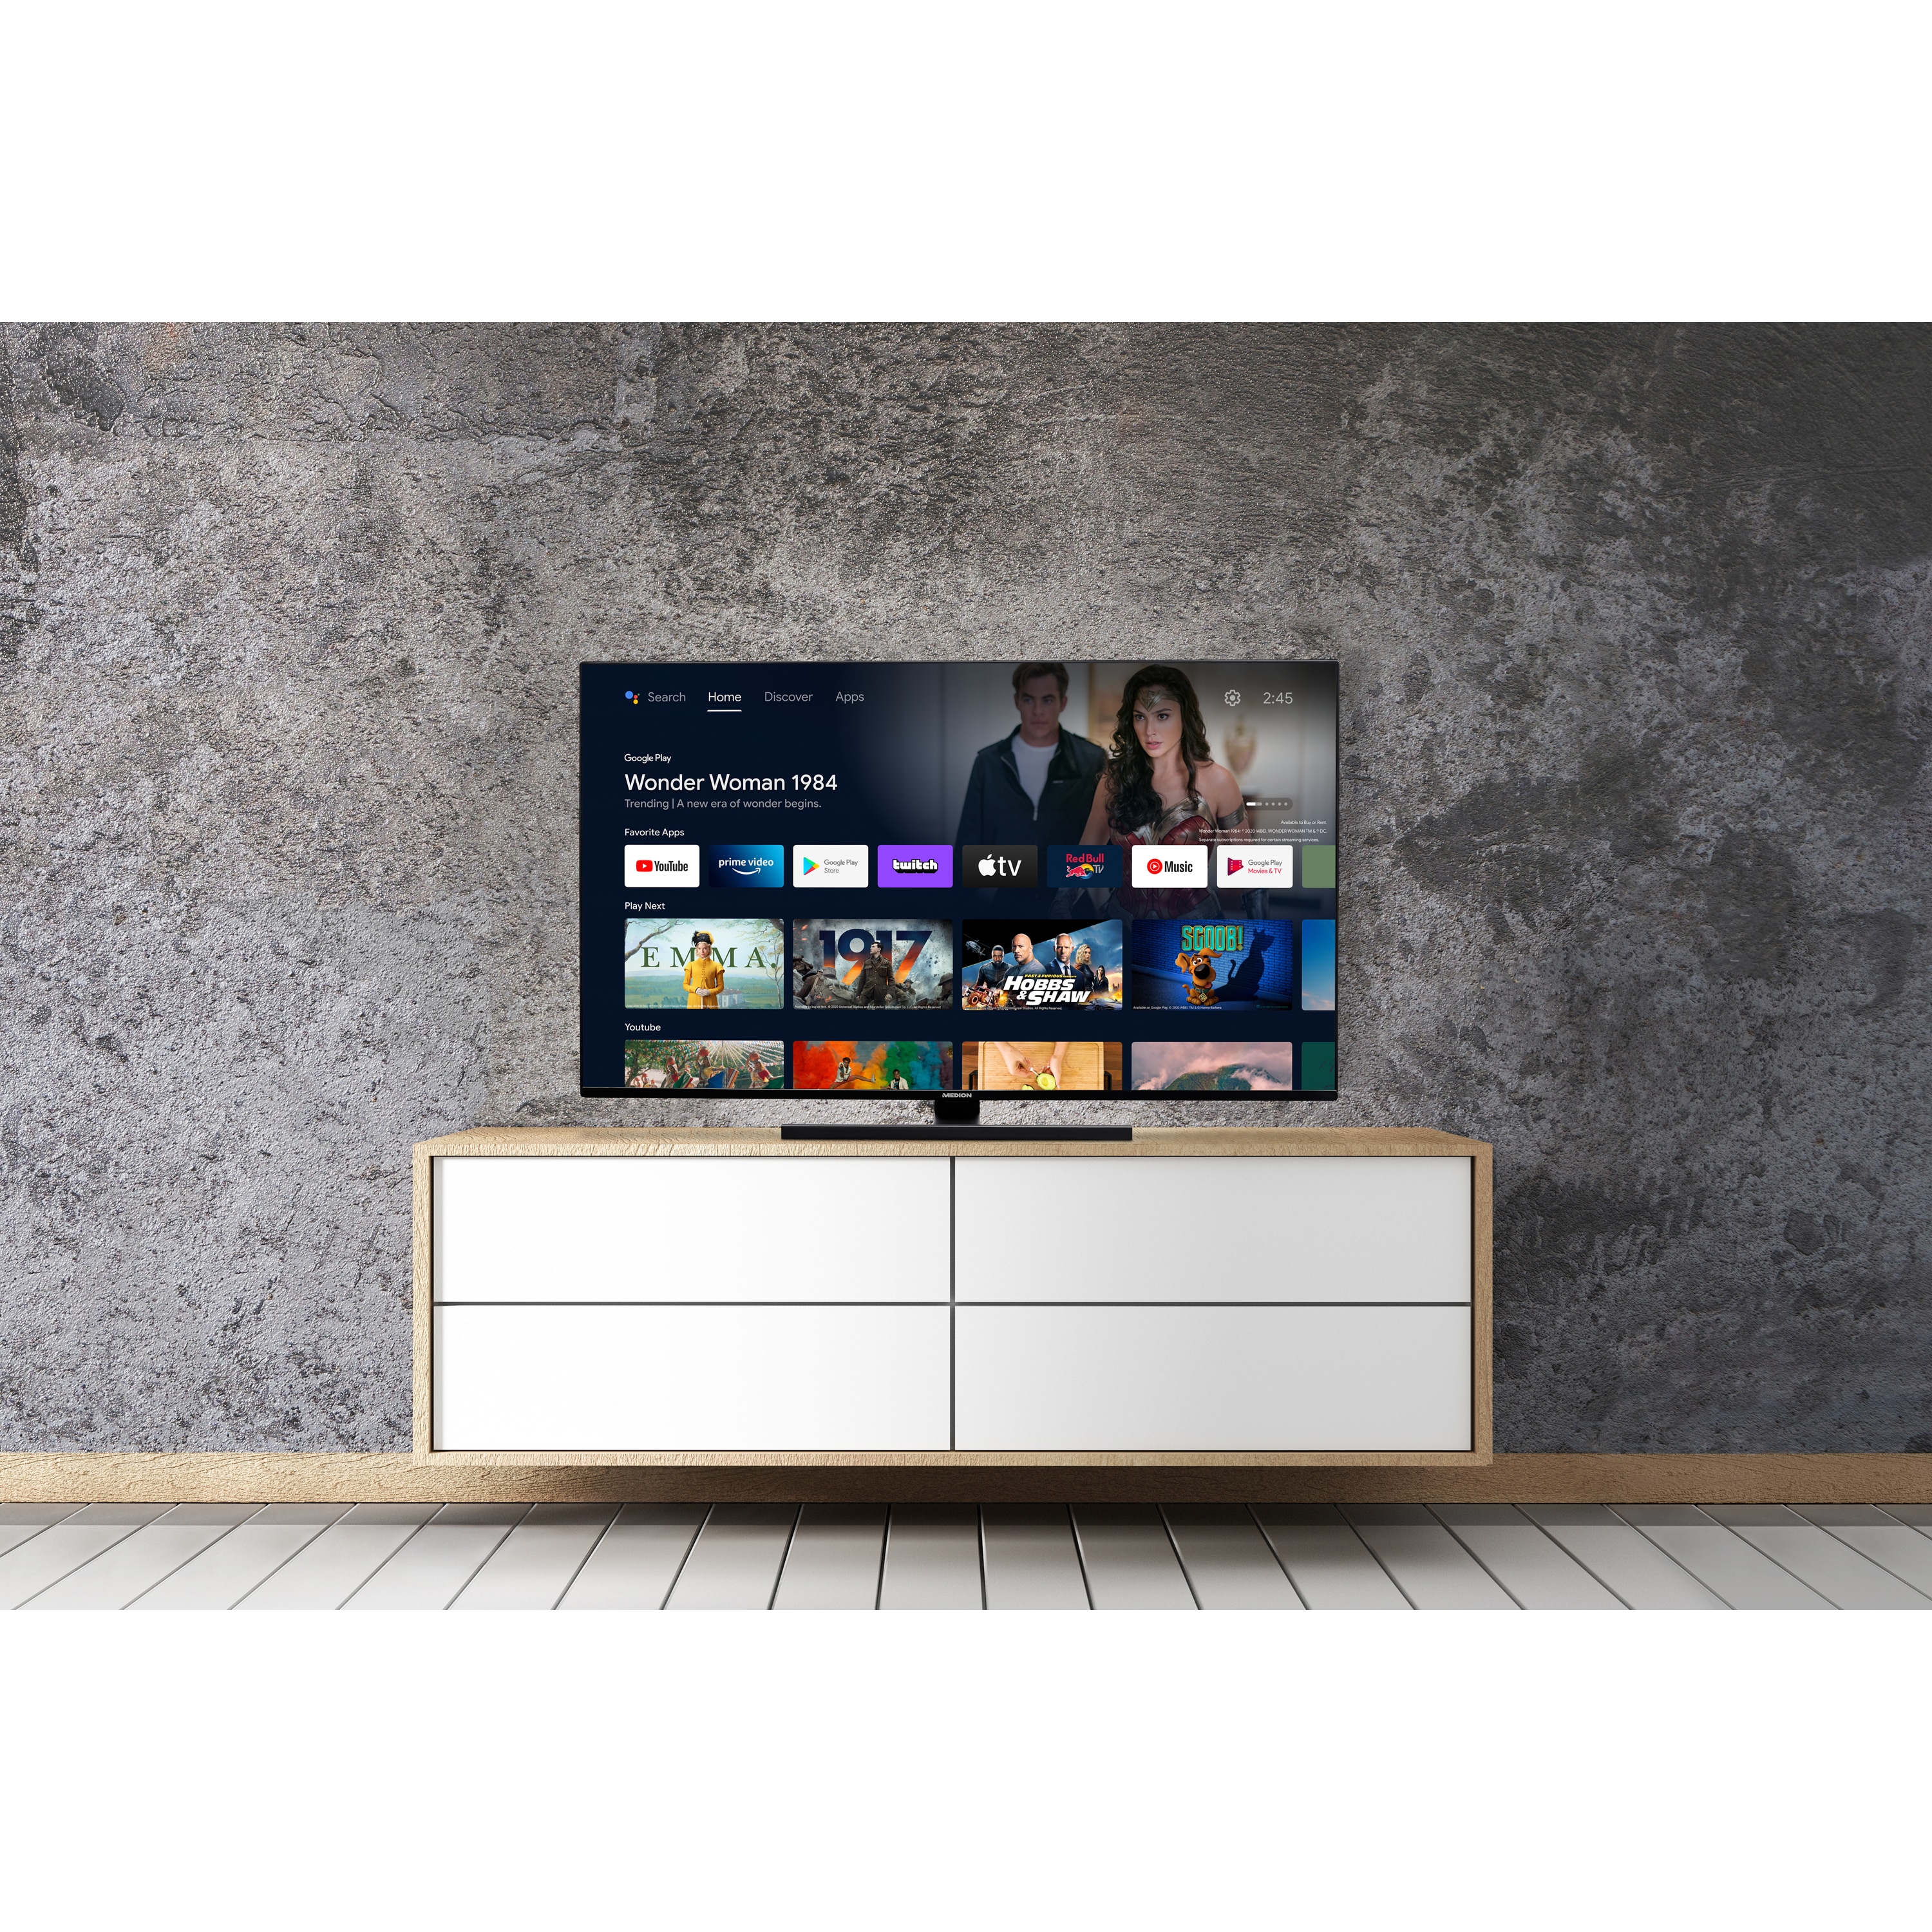 MEDION® LIFE® X14377 (MD 30075) QLED Android TV, 108 cm (43'') Ultra HD Smart-TV, HDR, Dolby Vision®, Micro Dimming, MEMC, PVR ready, Netflix, Amazon Prime Video, Bluetooth®, DTS Virtual X, DTS X und Dolby Atmos Unterstützung, HD Triple Tuner, CI+